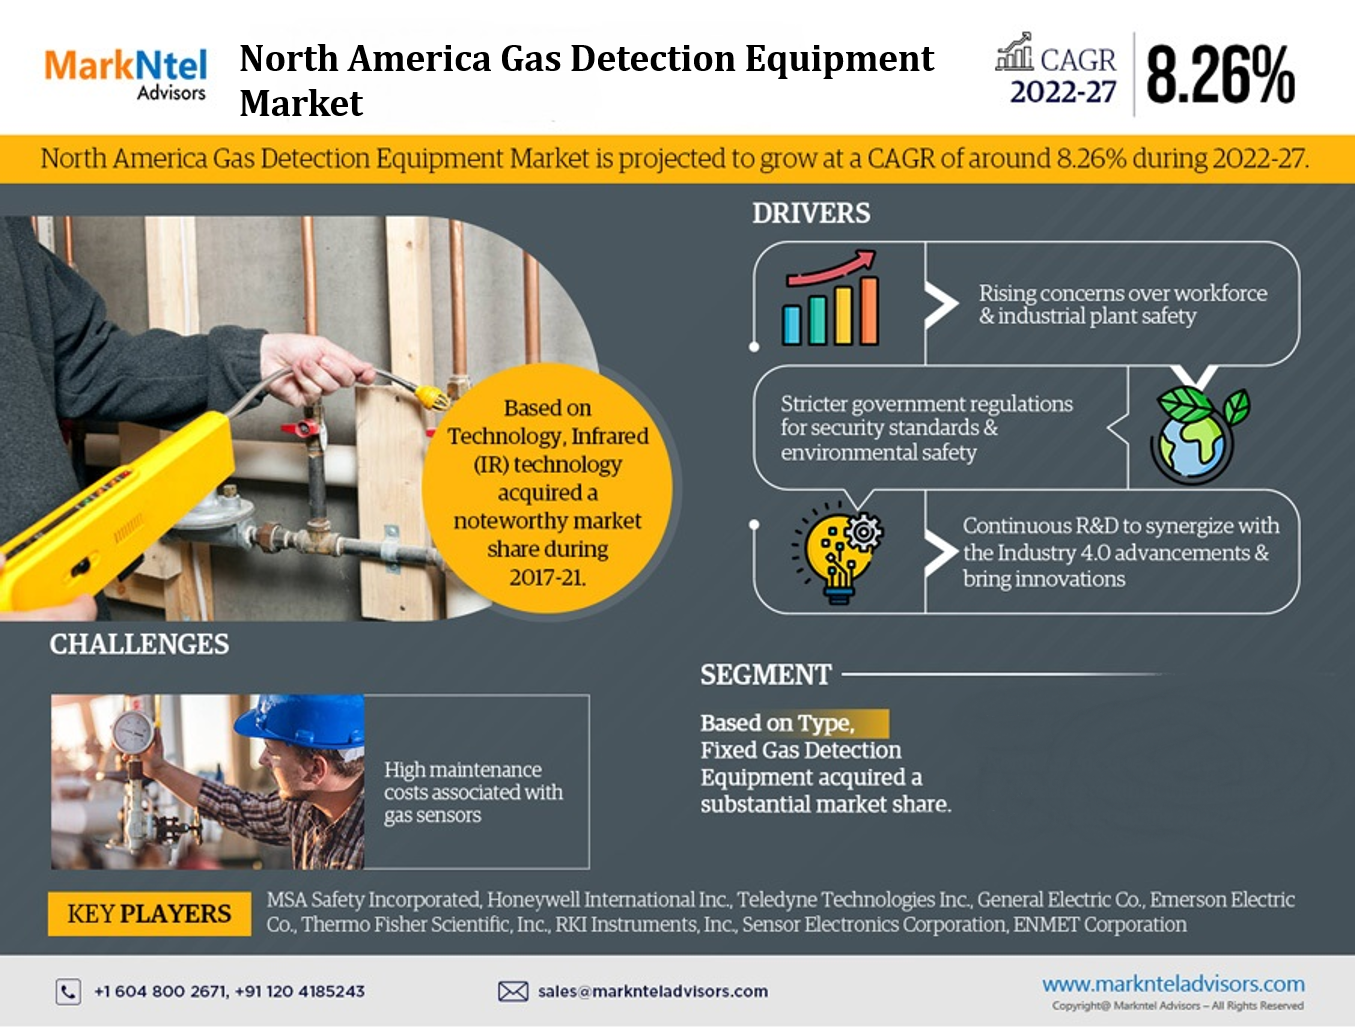 Key Trends and Challenges in the North America Gas Detection Equipment Market 2022-2027